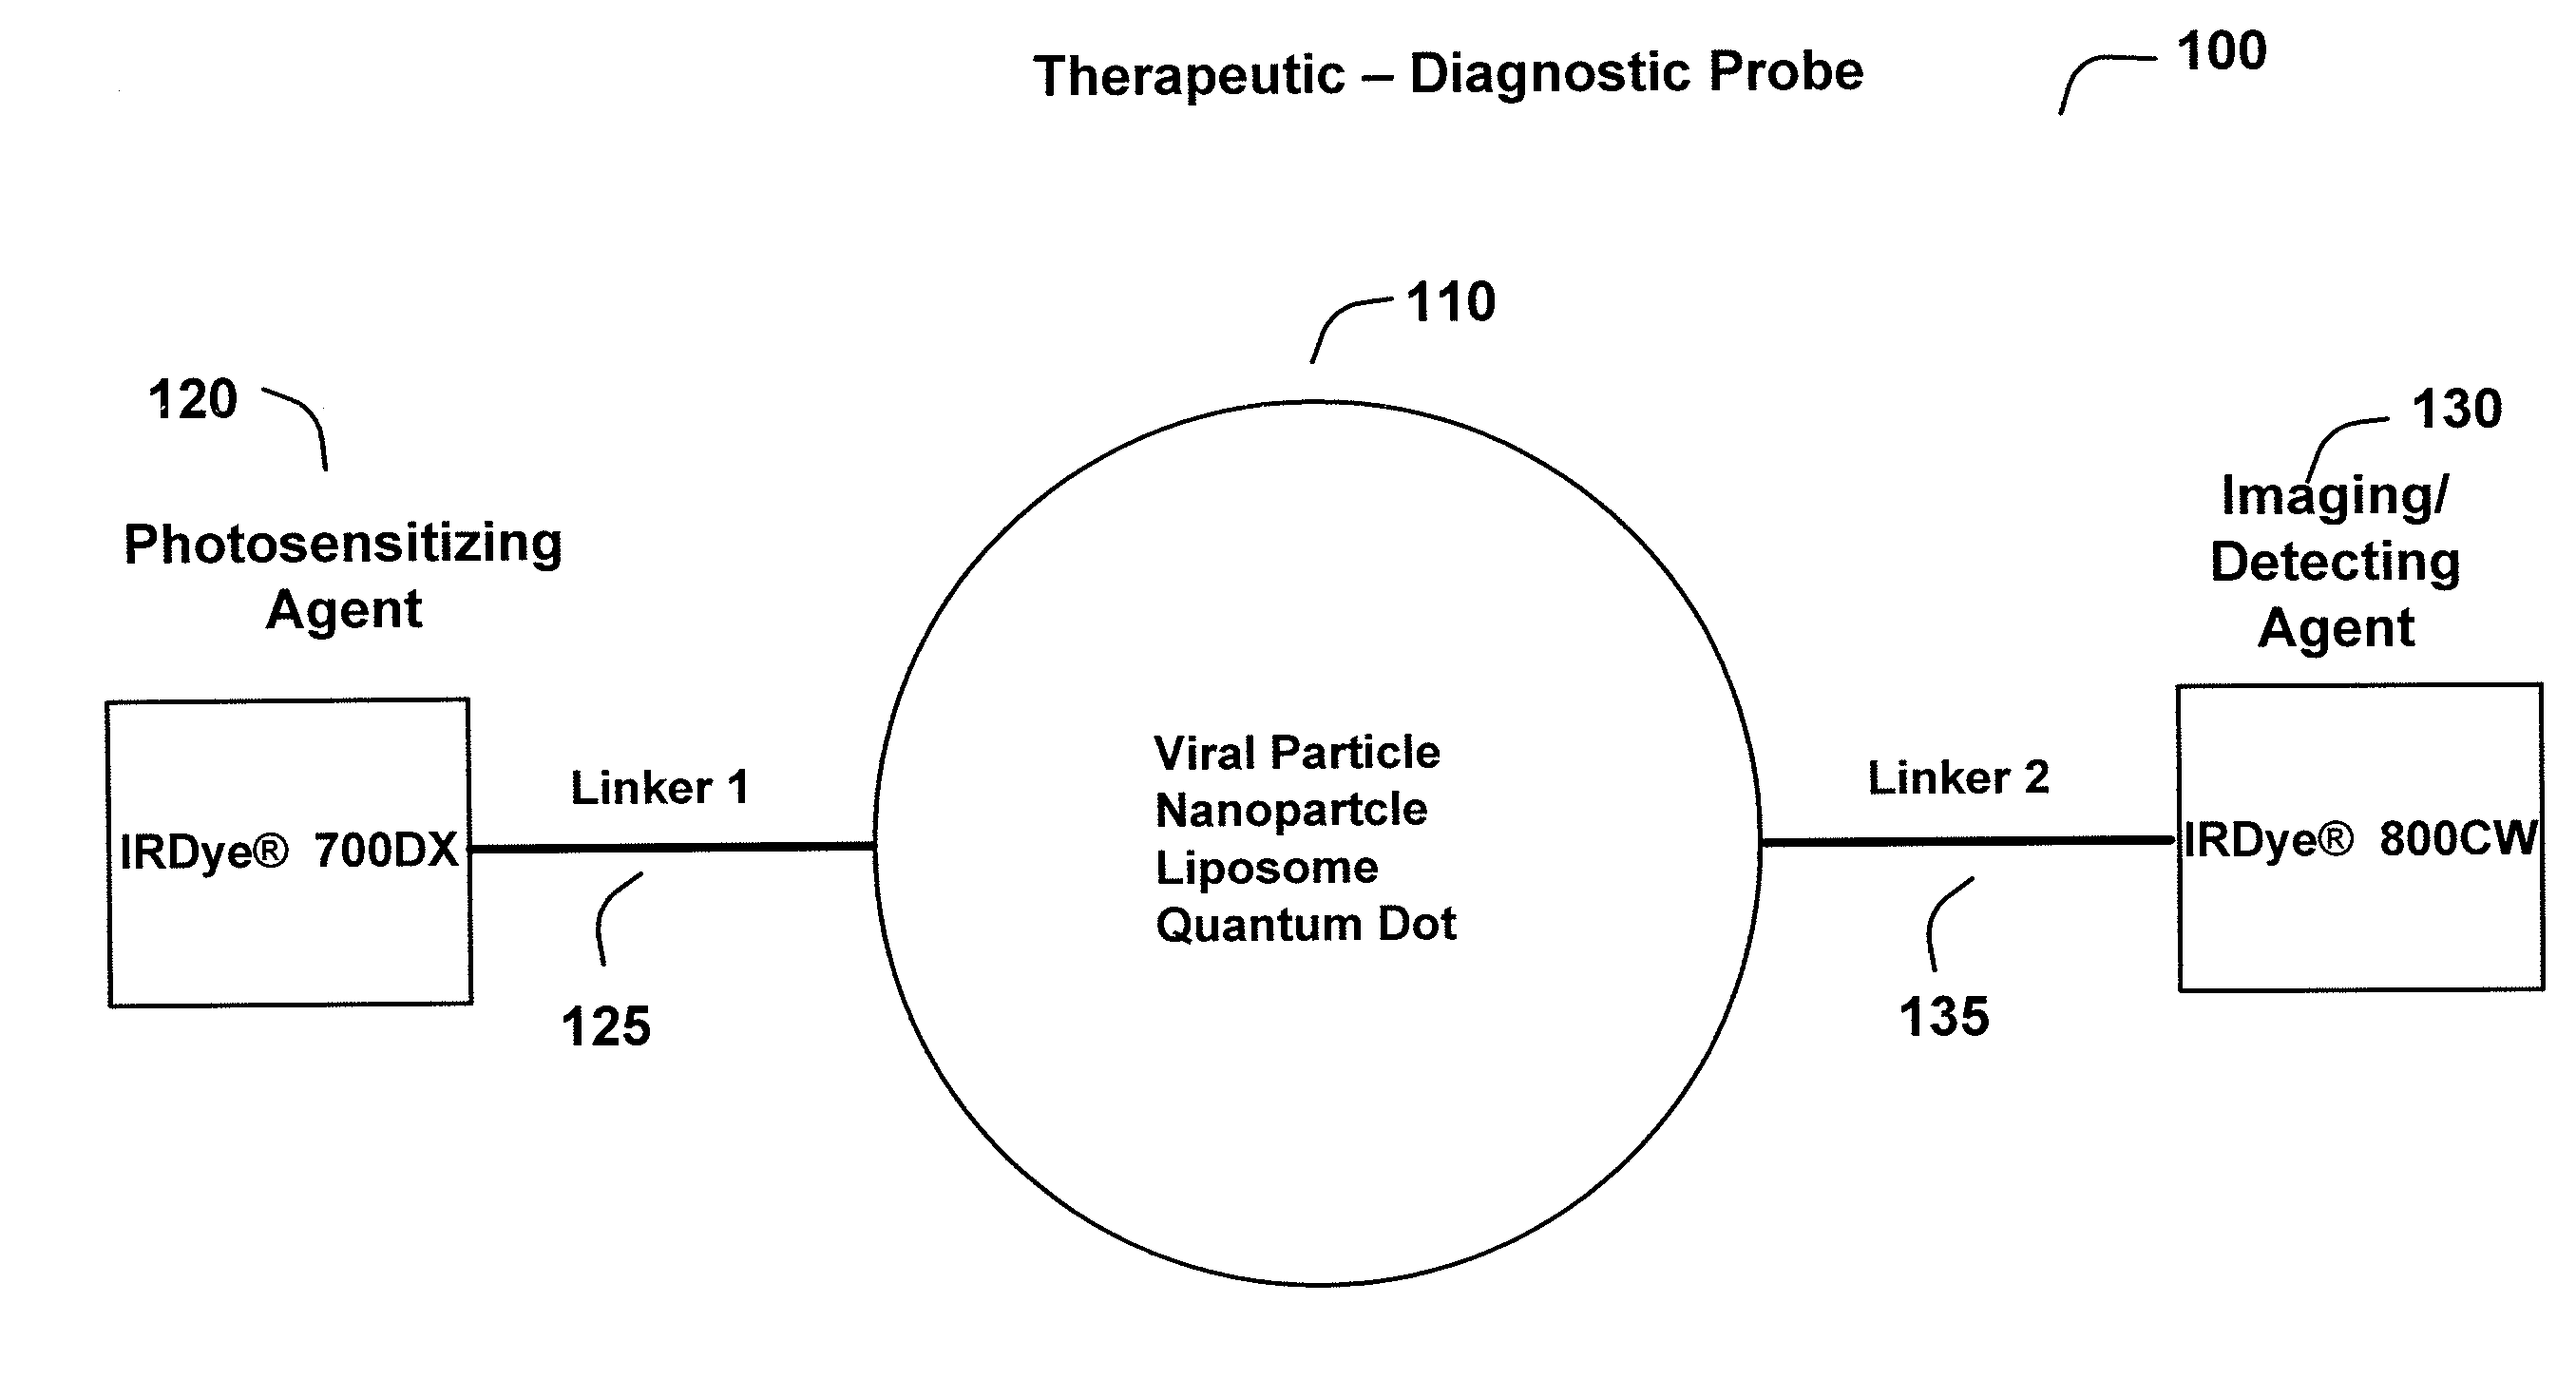 Therapeutic and diagnostic probes